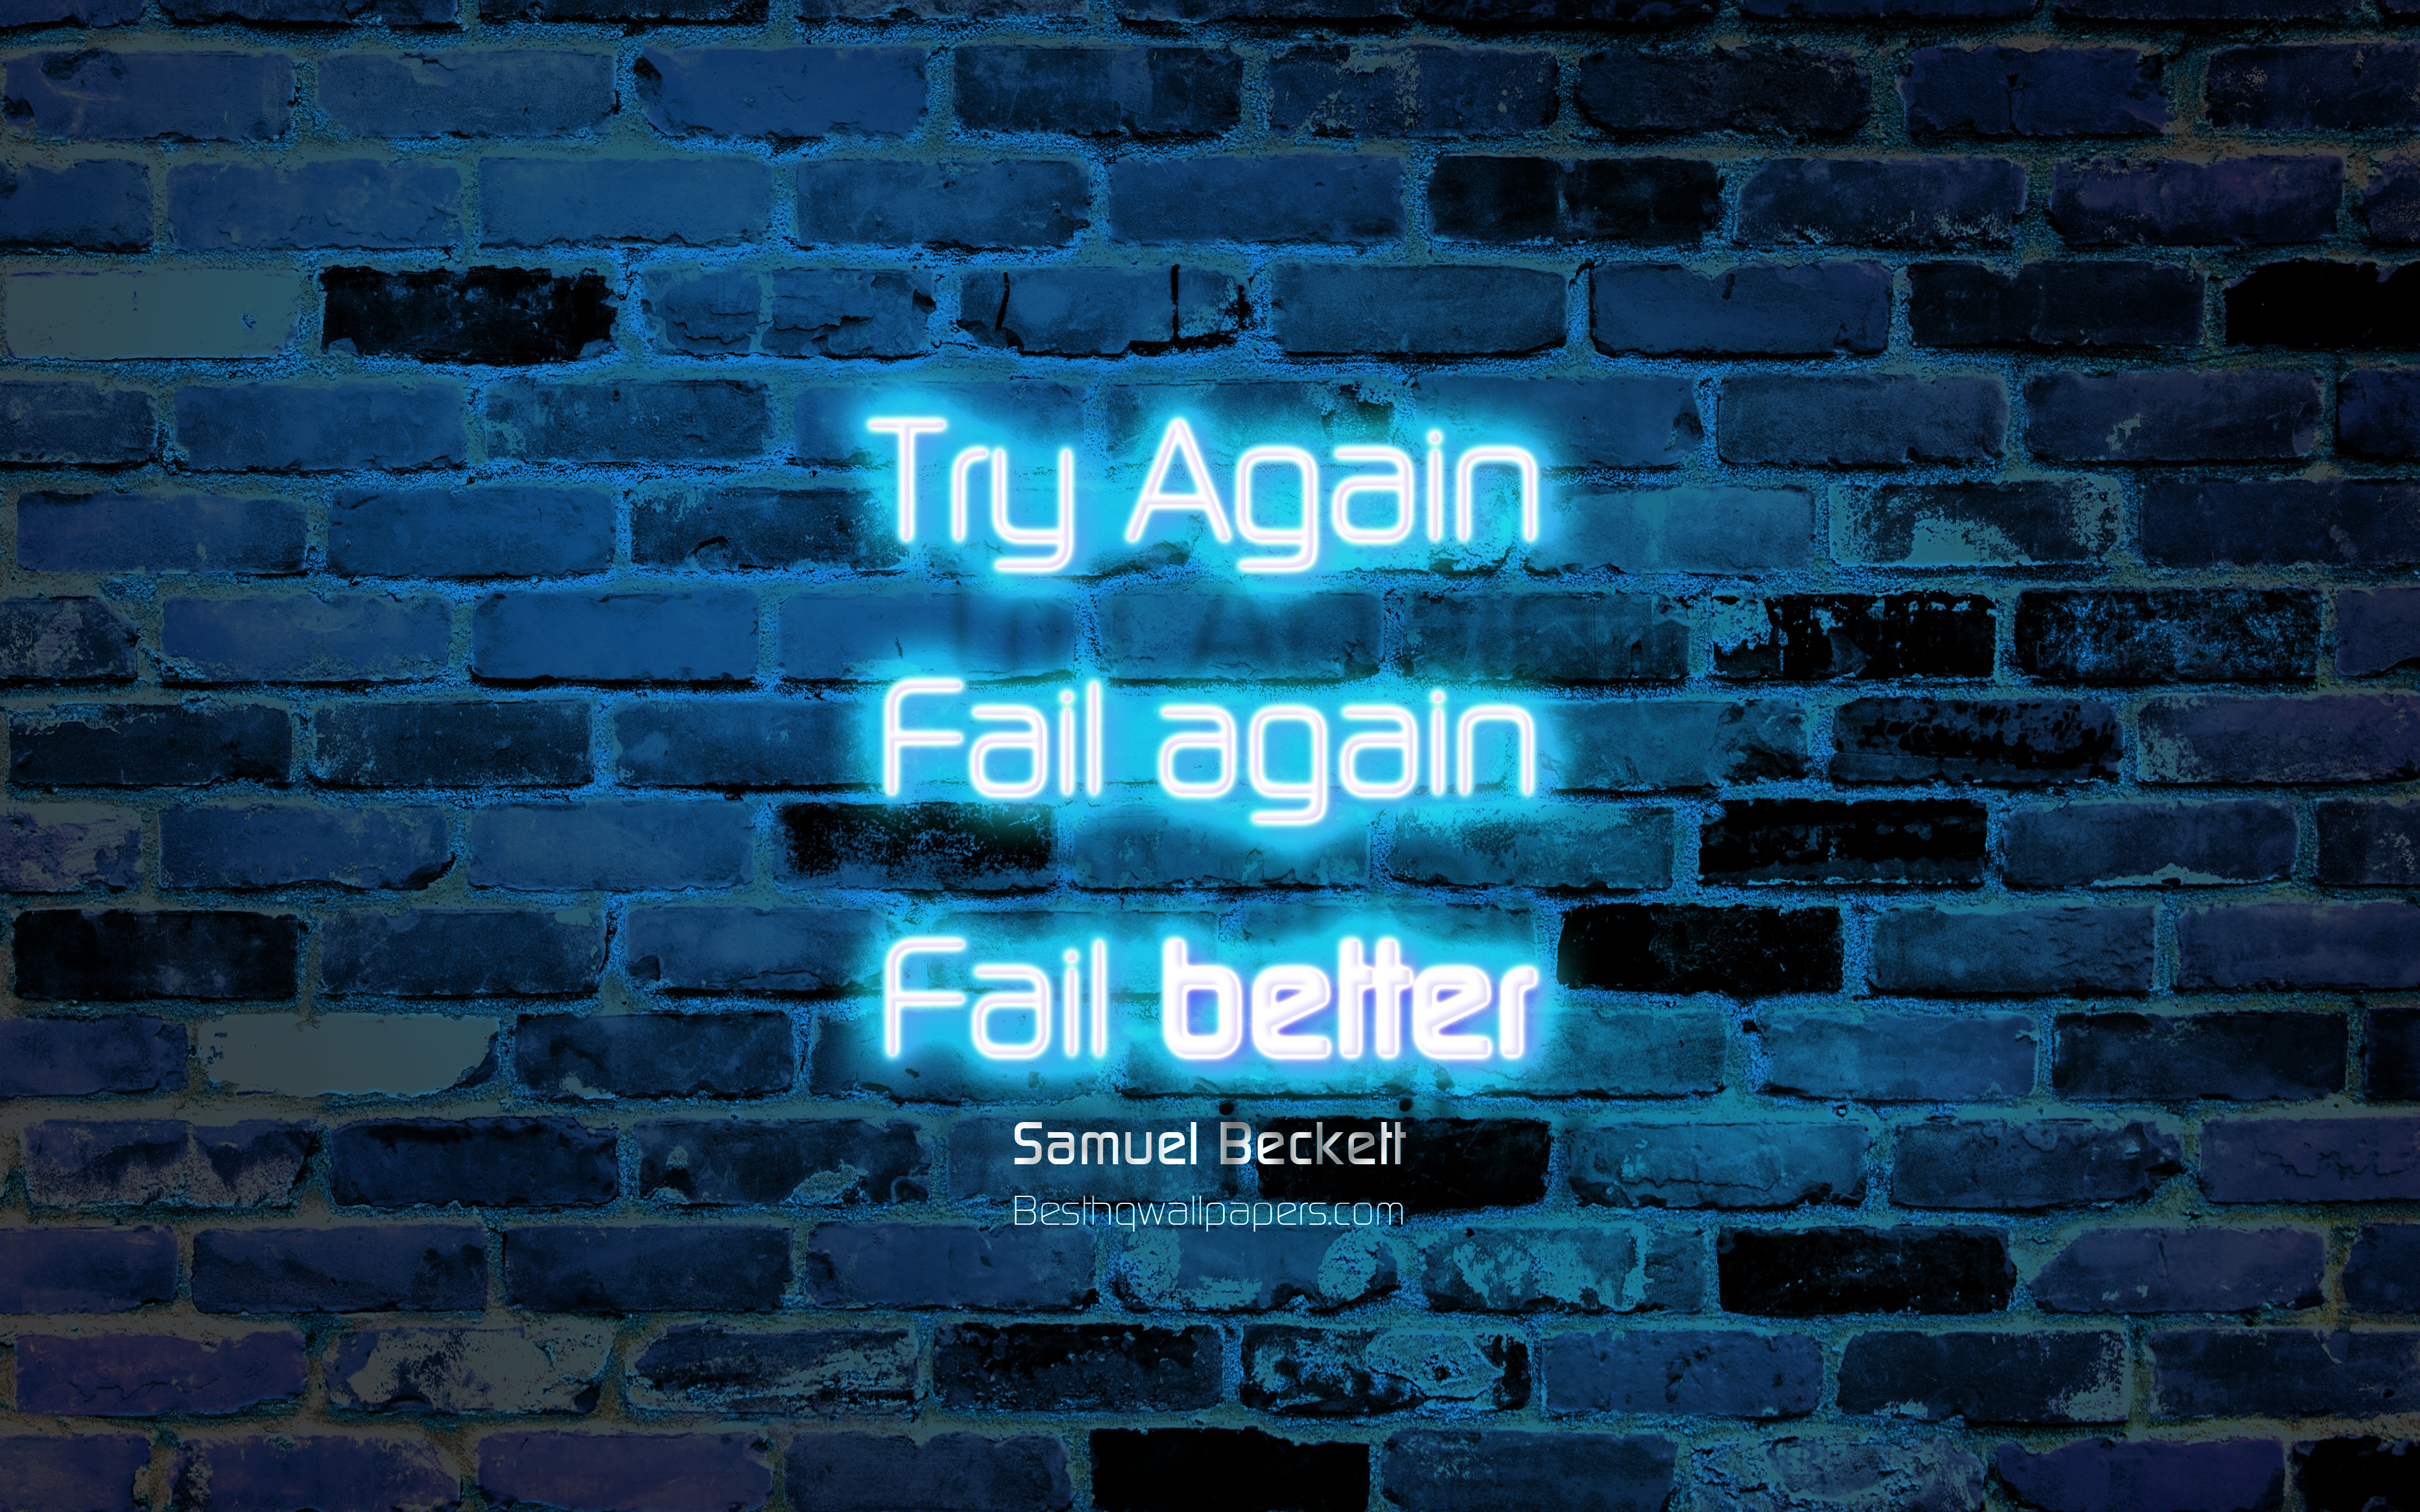 Download wallpaper Try Again Fail again Fail better, 4k, blue brick wall, Samuel Beckett Quotes, popular quotes, neon text, inspiration, Samuel Beckett, quotes about life for desktop with resolution 3840x2400. High Quality